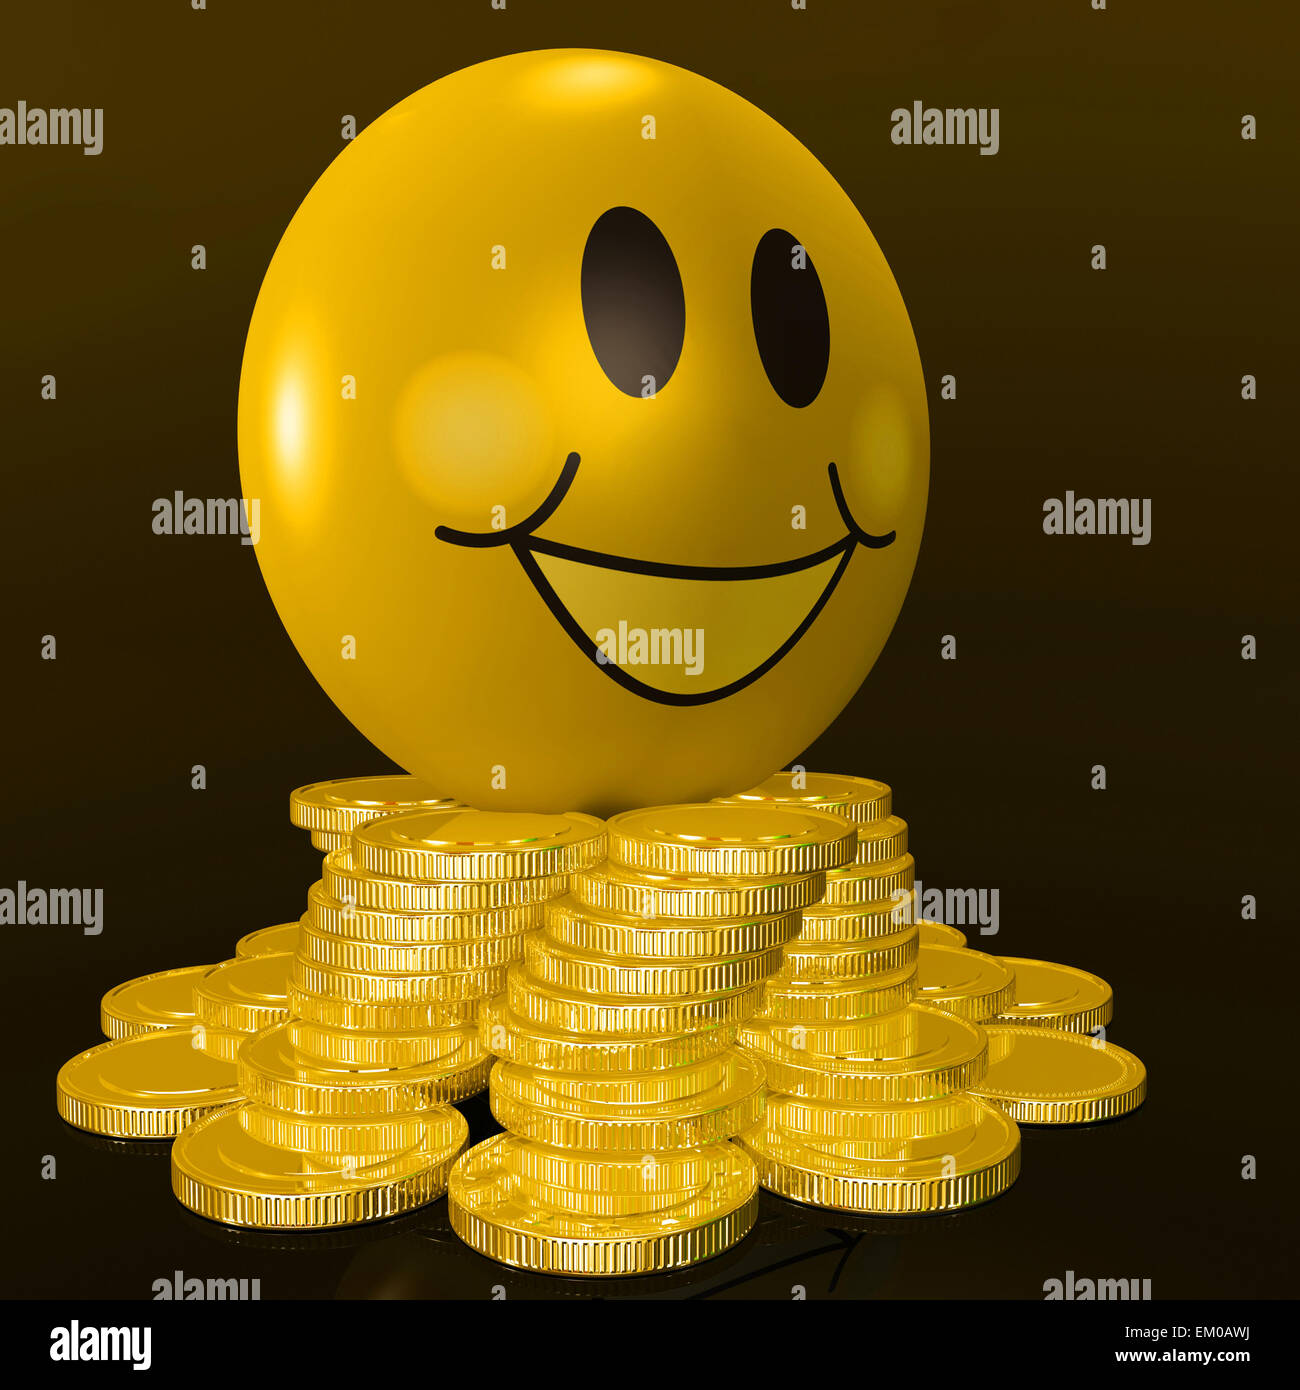 Smiley Face With Coins Shows Profitable Earnings Stock Photo